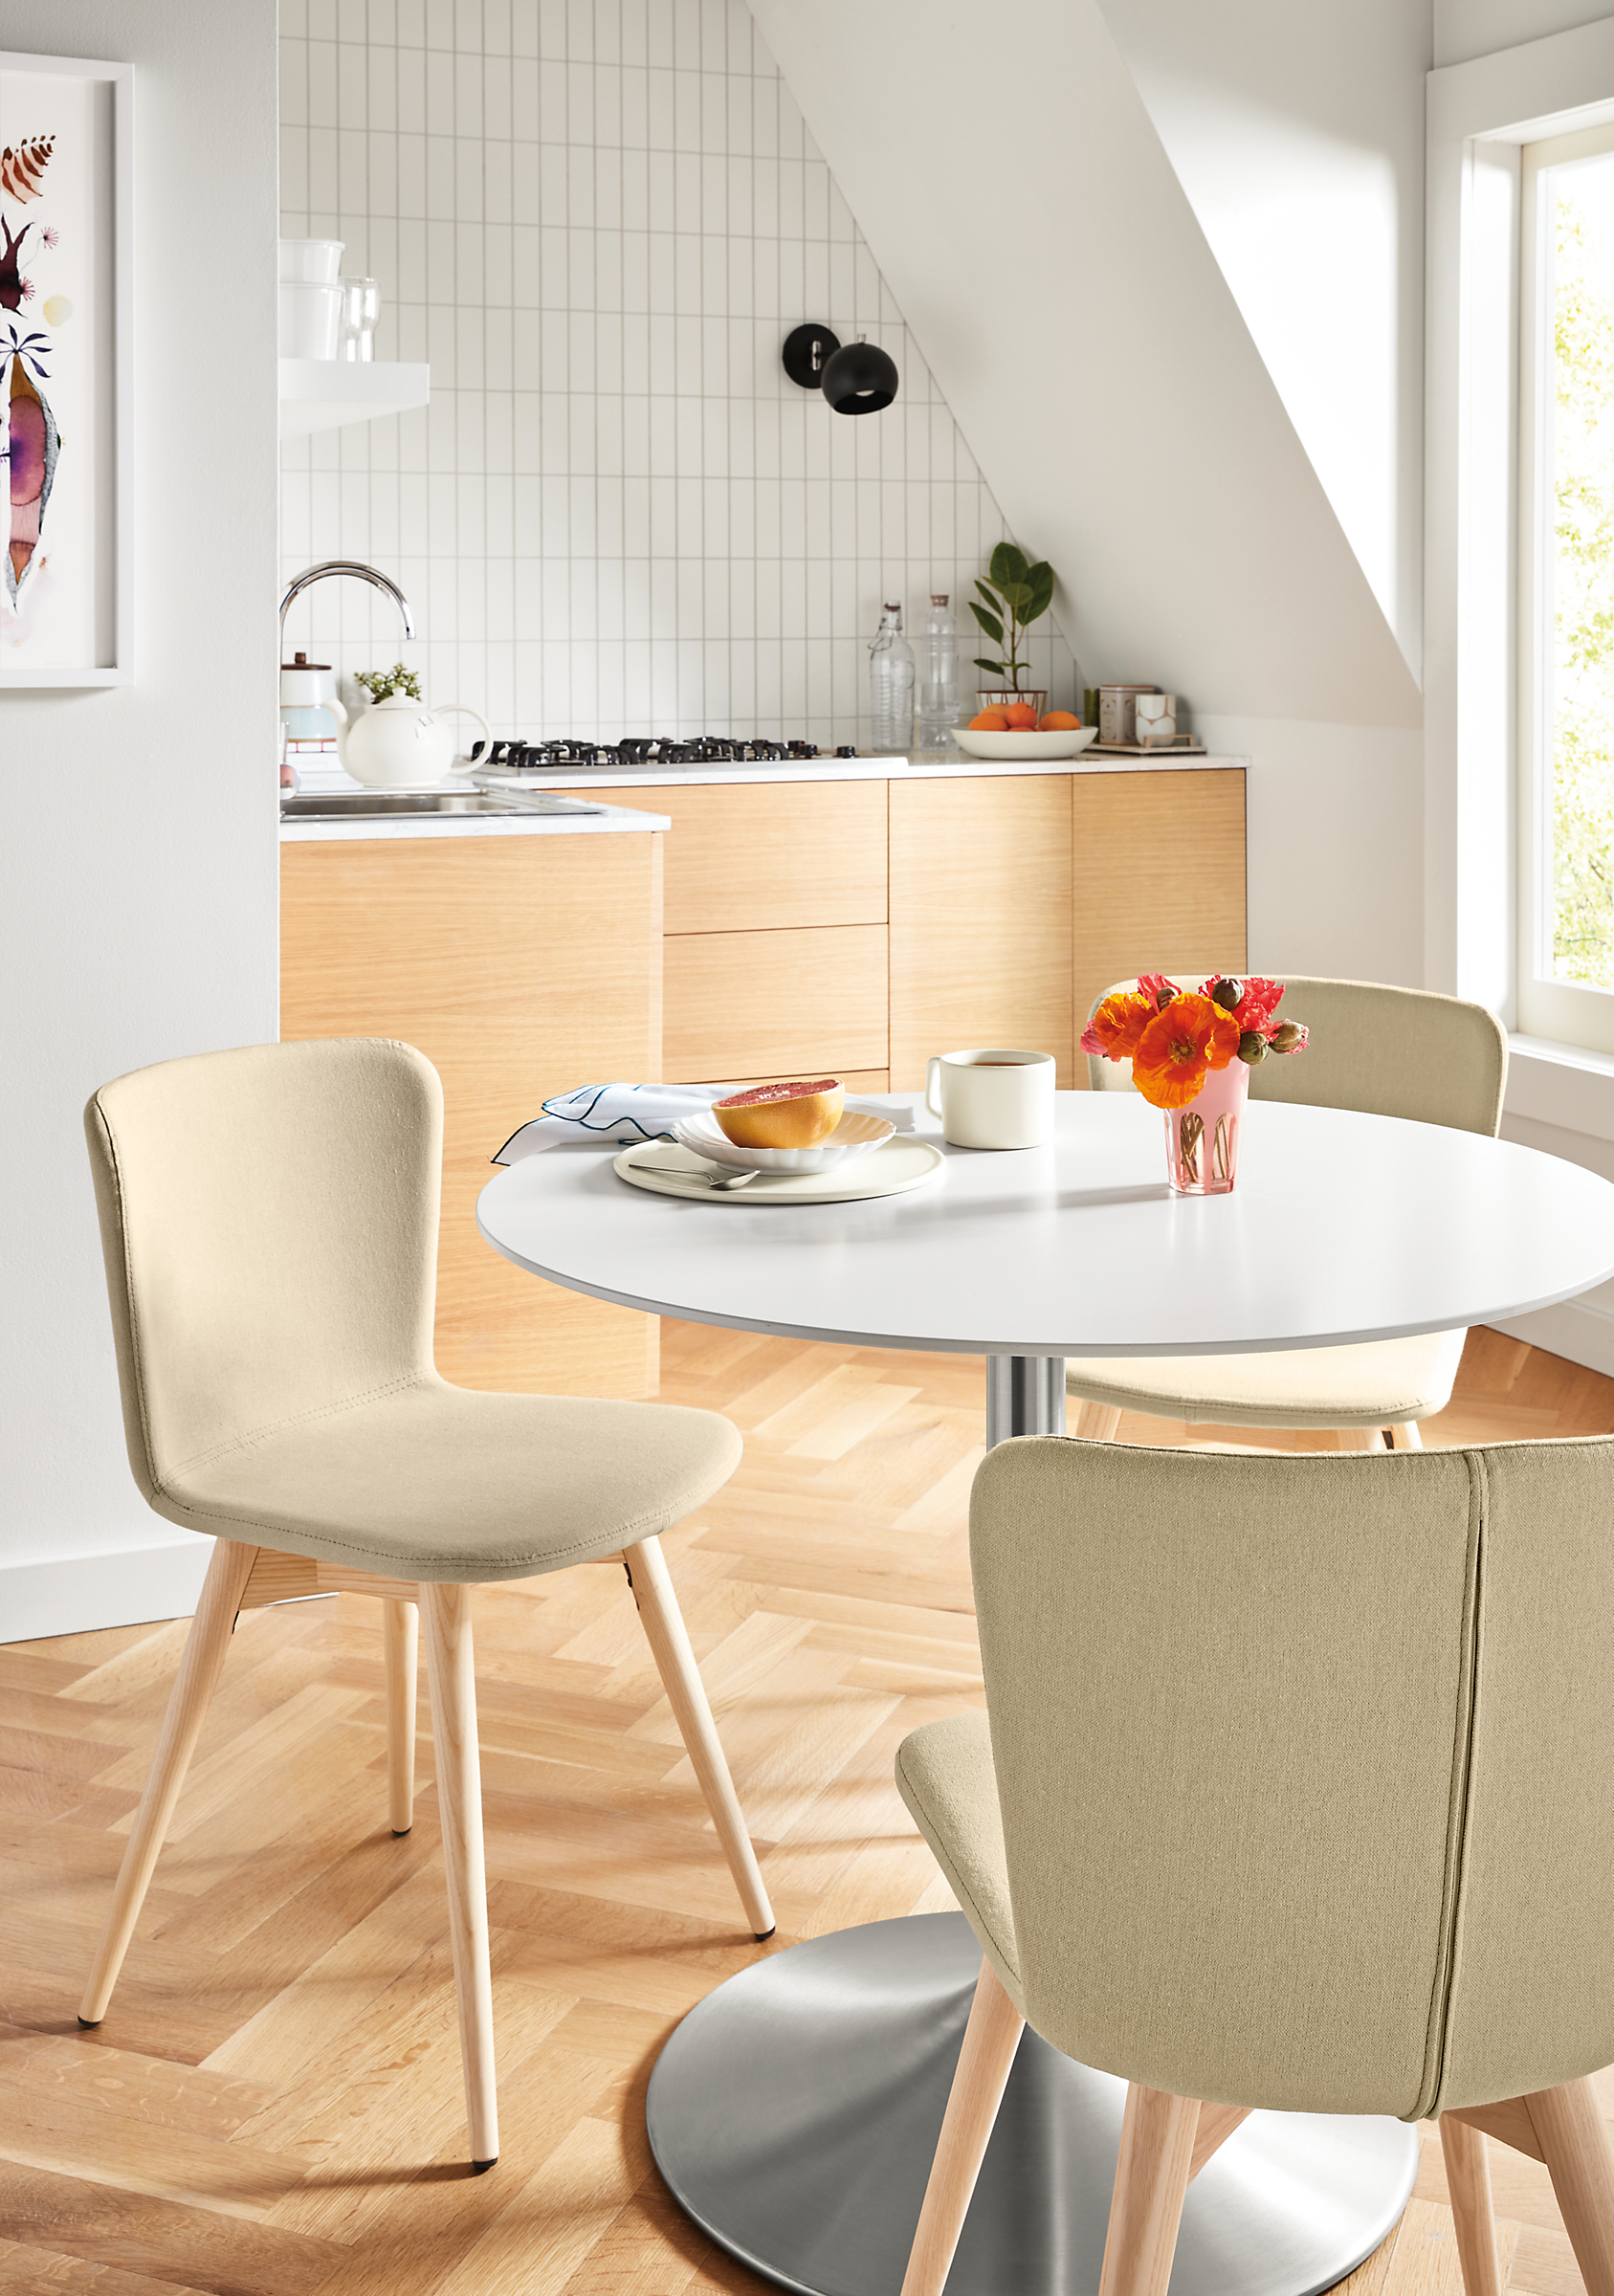 room setting with aria table and delilah chairs in fabric with wood legs in kitchen area